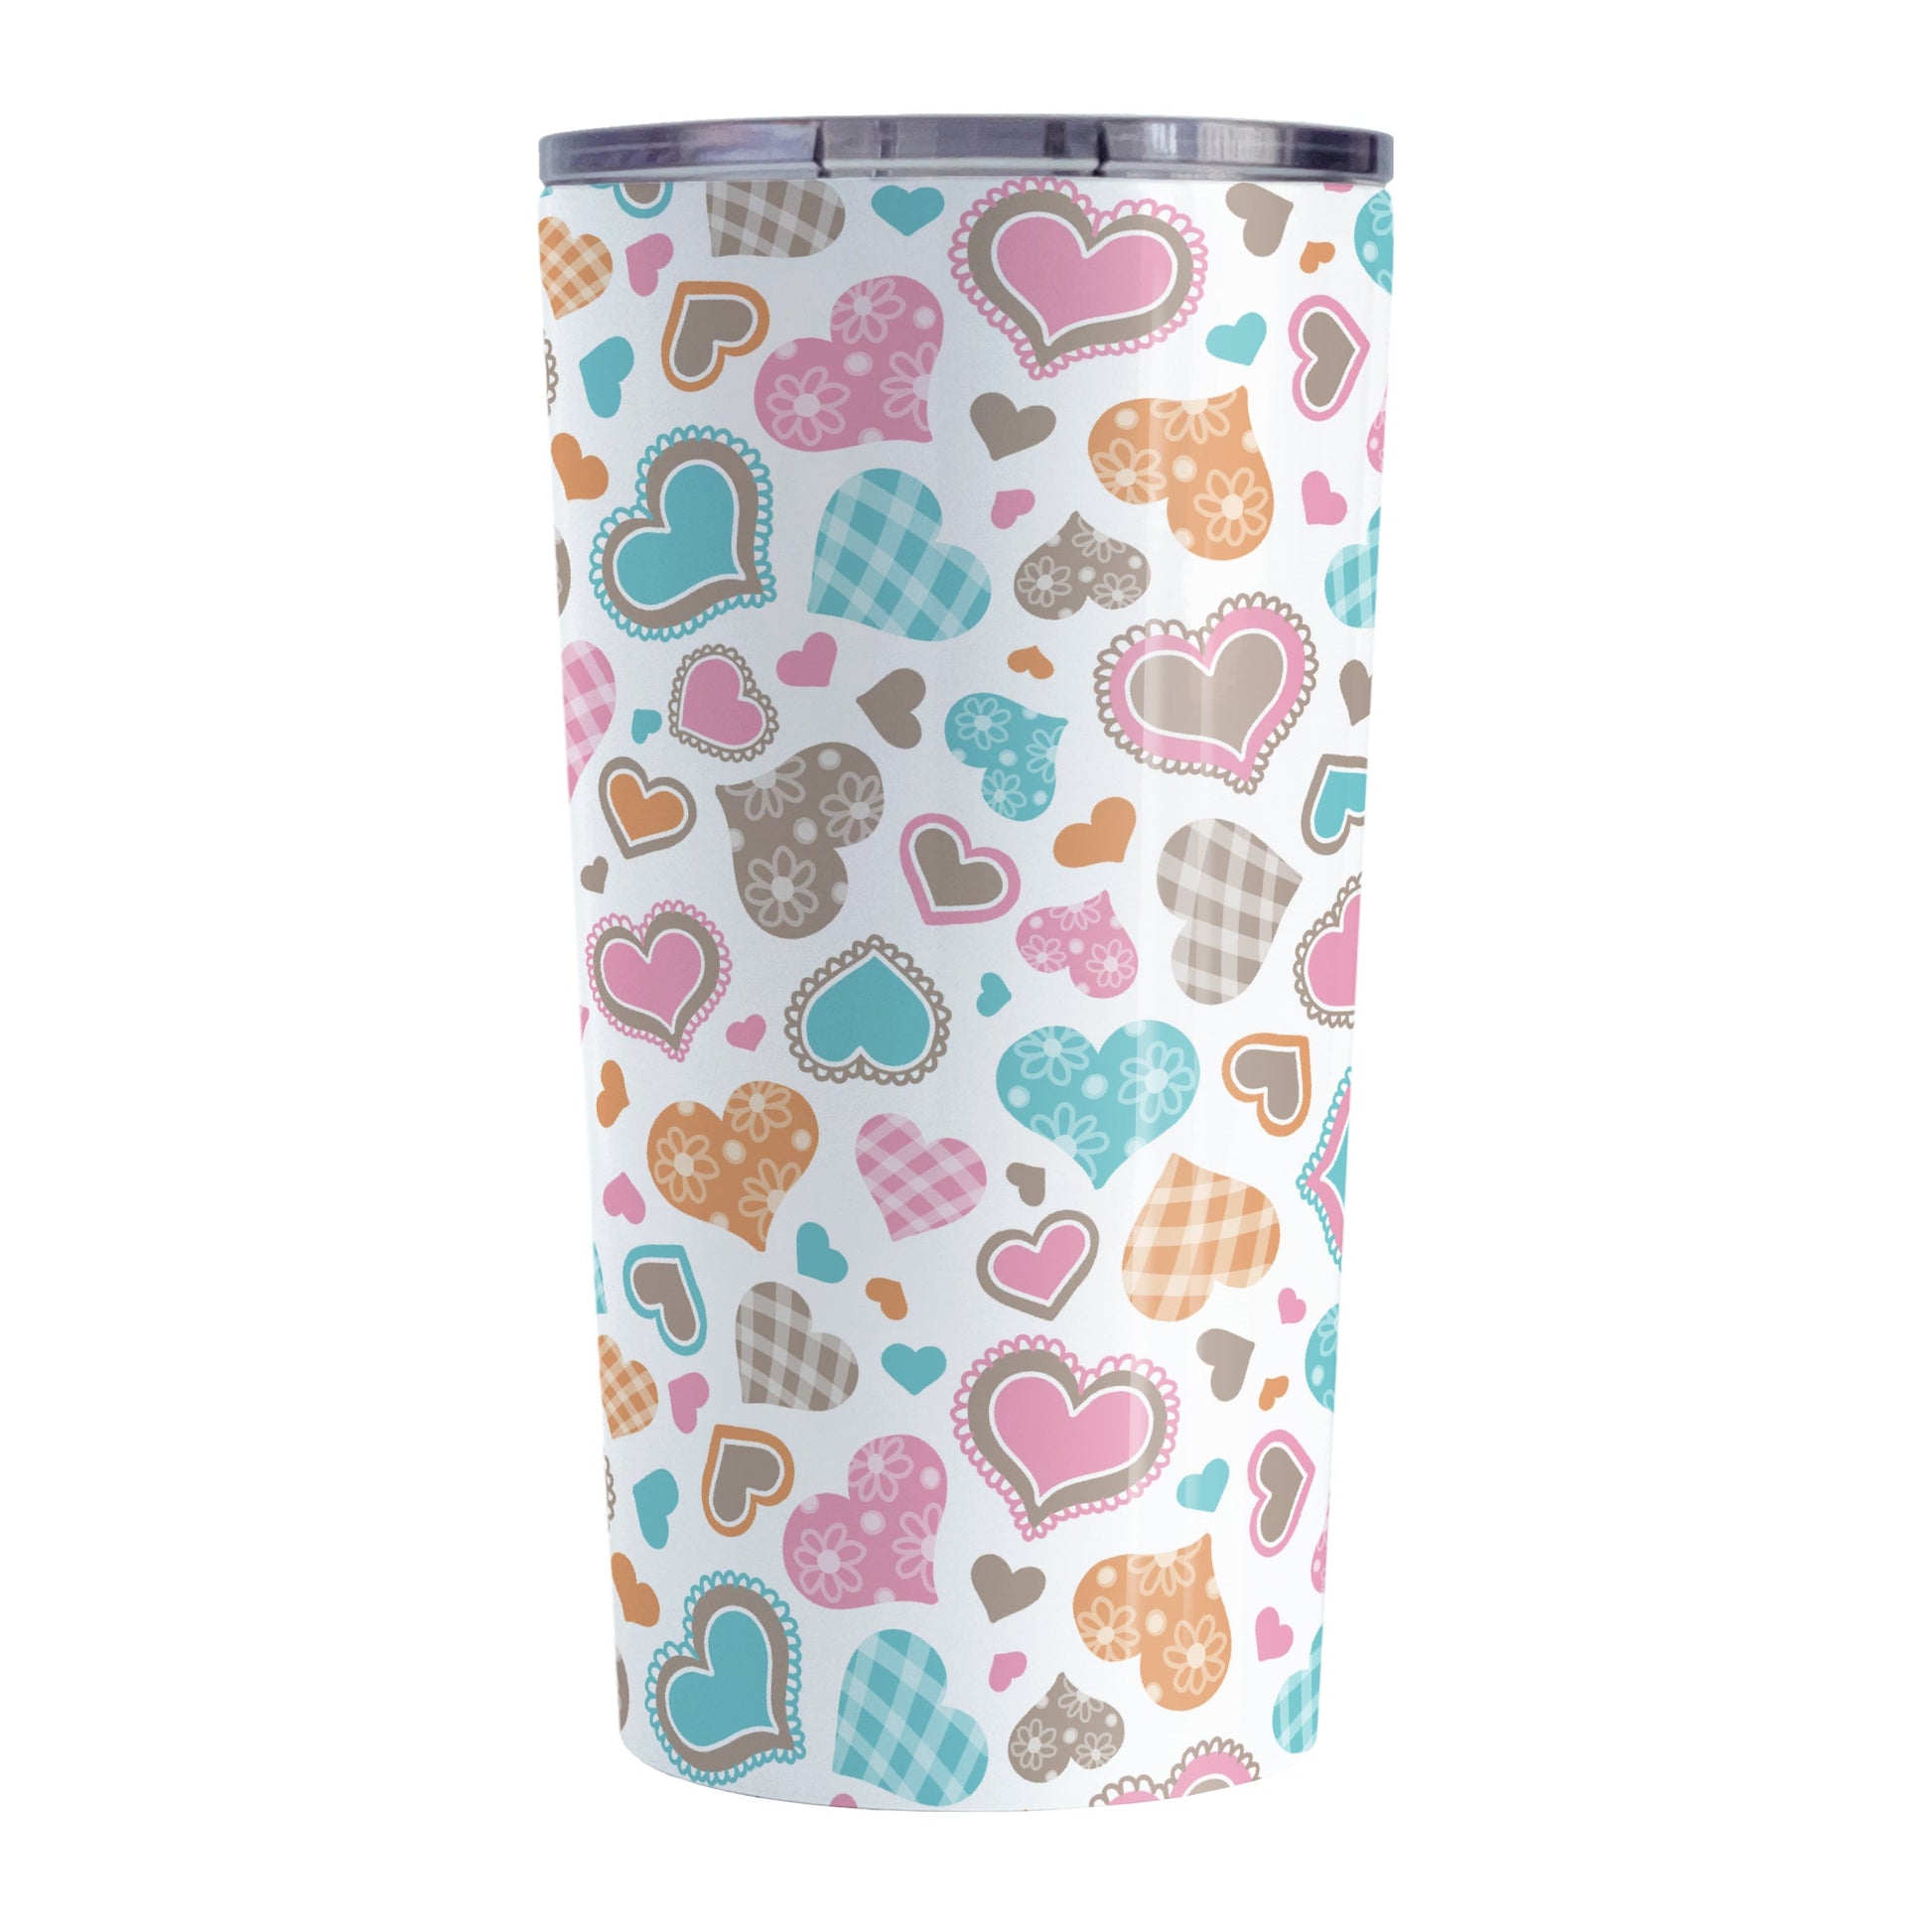 Cutesy Hearts Pattern Tumbler Cup (20oz, stainless steel insulated) at Amy's Coffee Mugs